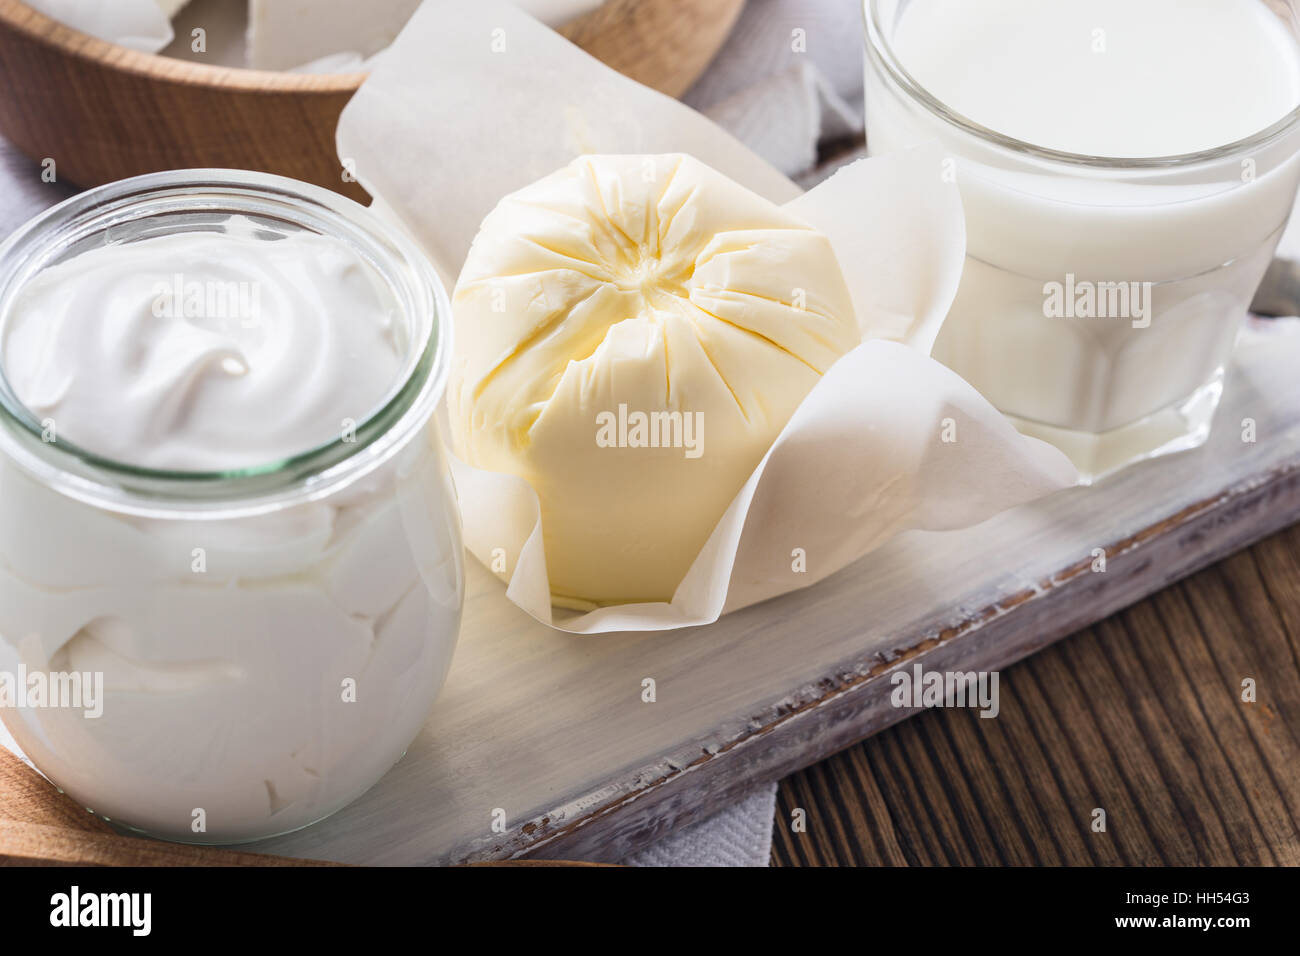 Organic dairy products on rustic wooden table. Milk, butter, sour cream Stock Photo